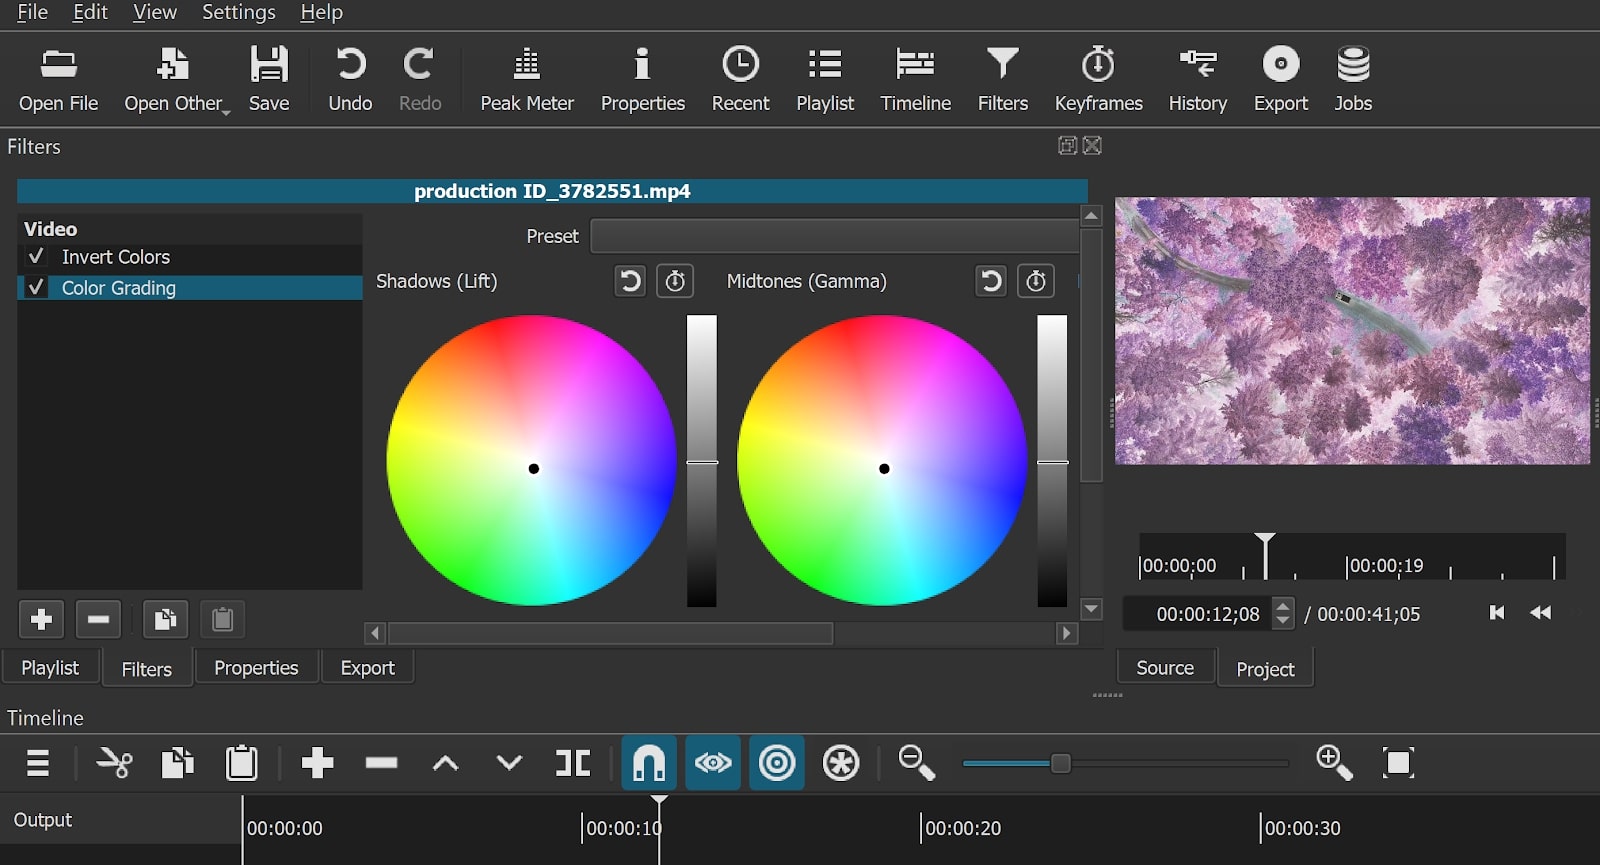 Interface of Shotcut, one of the best video editing software tools